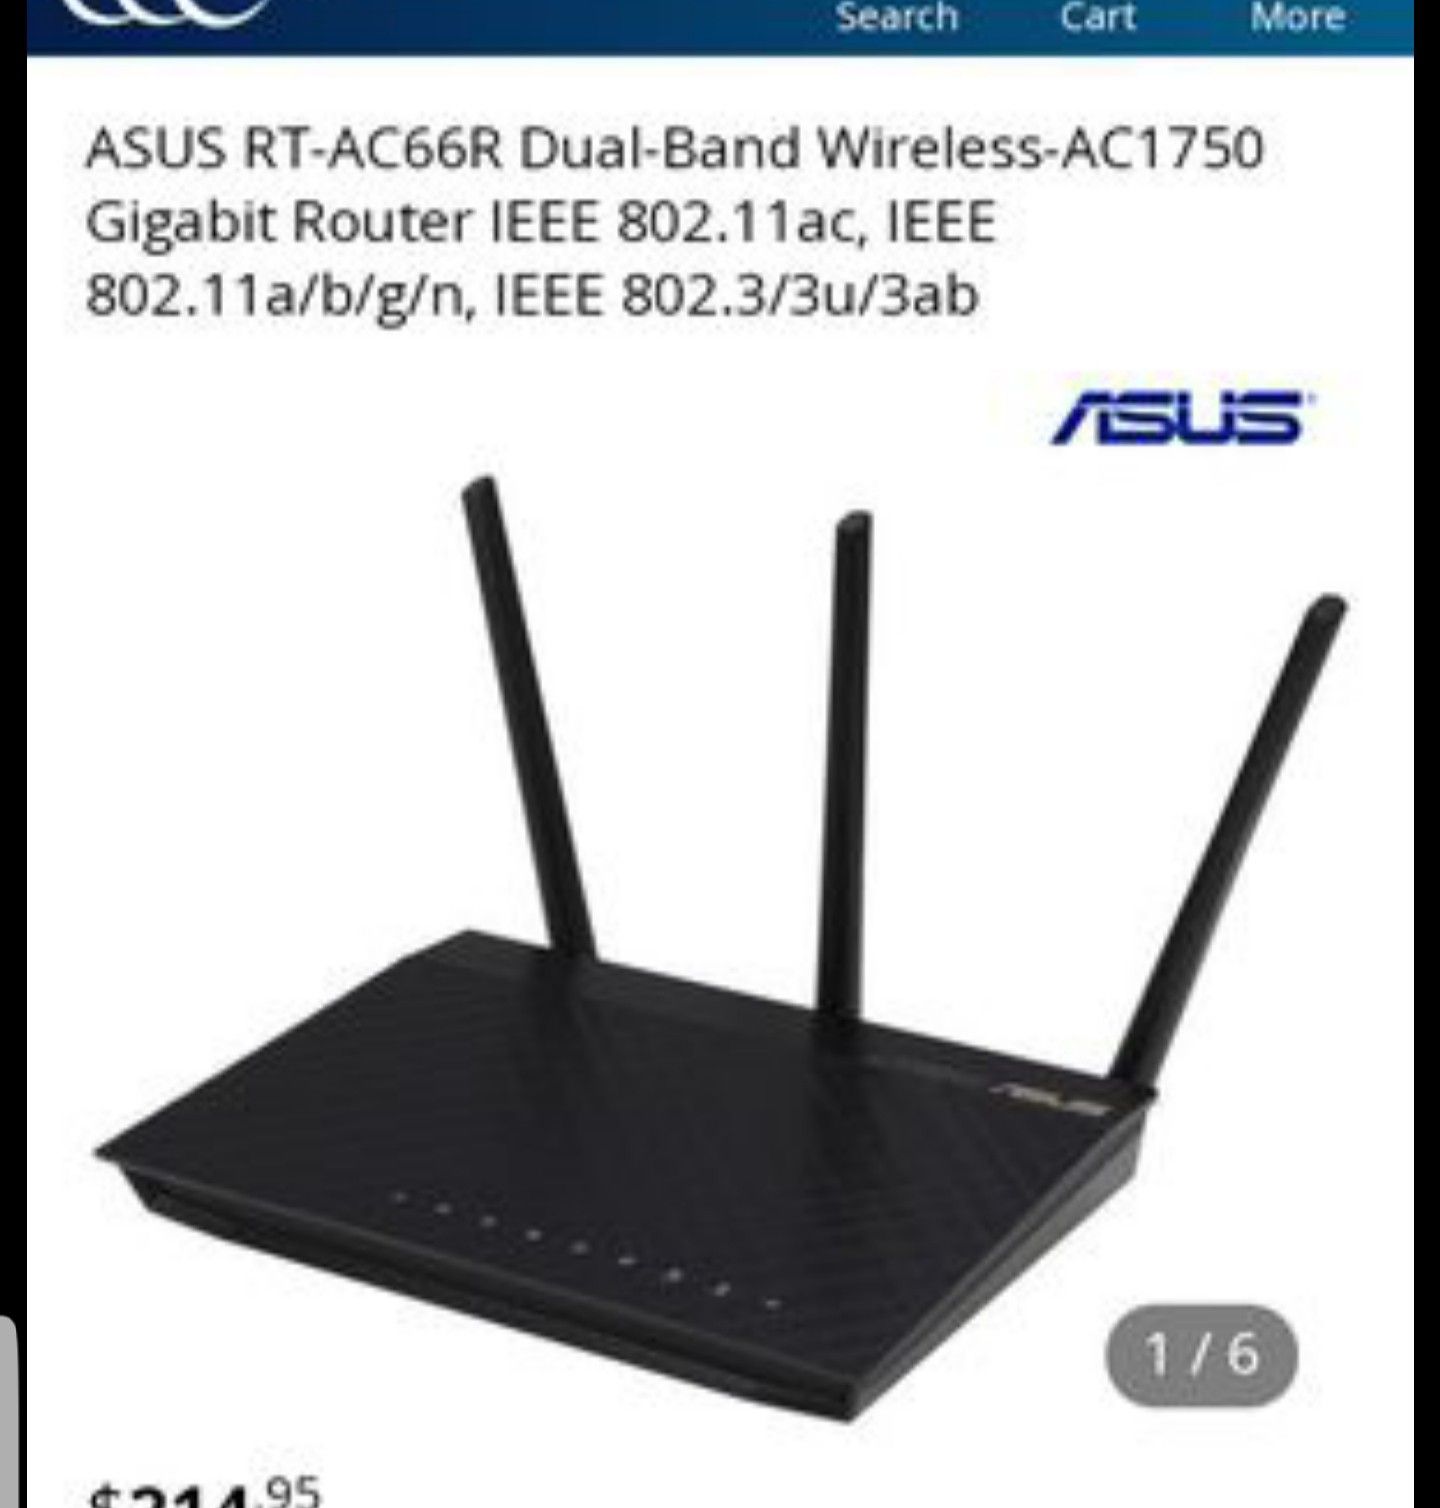 ASUS RT-AC66R Dual-Band Wireless-AC1750 Gigabit Router